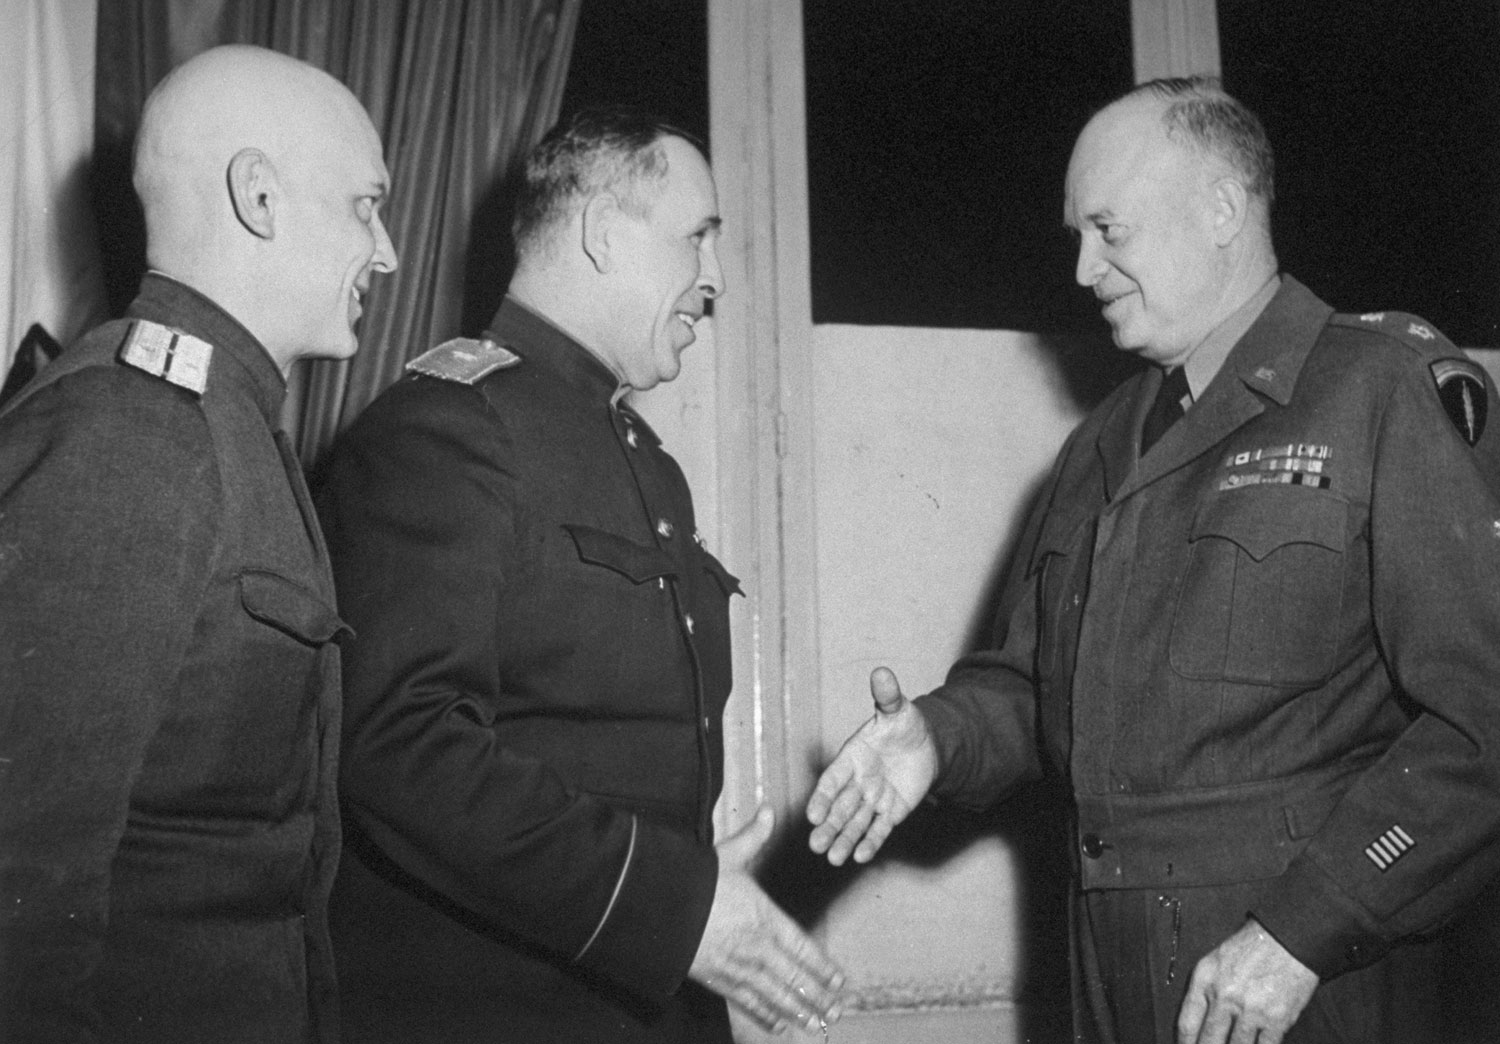 After Germany’s surrender papers were signed at Reims, France 7 May 1945, Soviet General Ivan Susloparov and his aide met with Supreme Allied Commander Dwight Eisenhower.